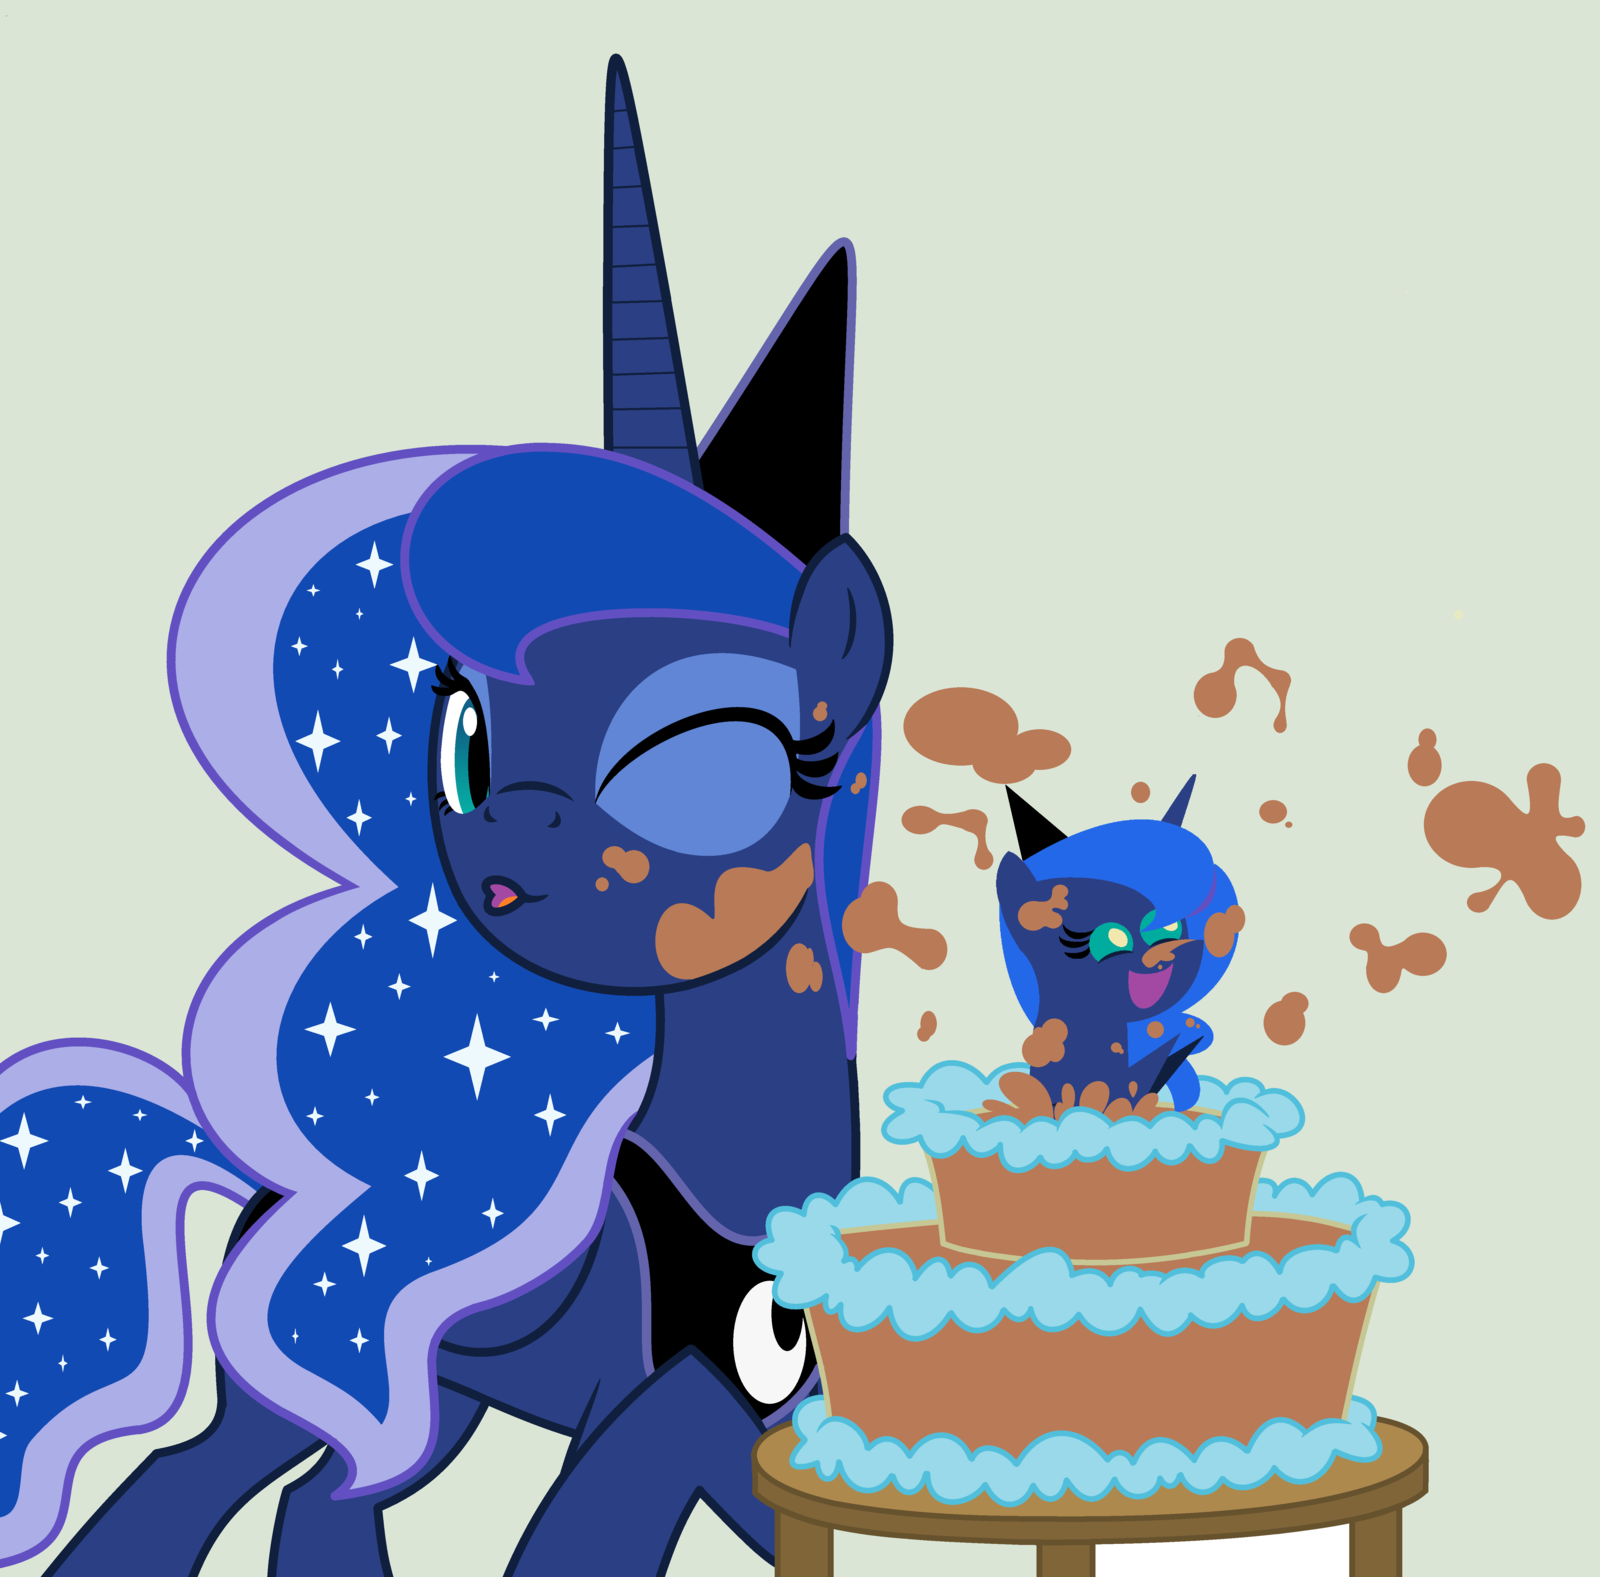 Princess Luna Wishes You A Happy Birthday! by Bubbly-Storm on DeviantArt